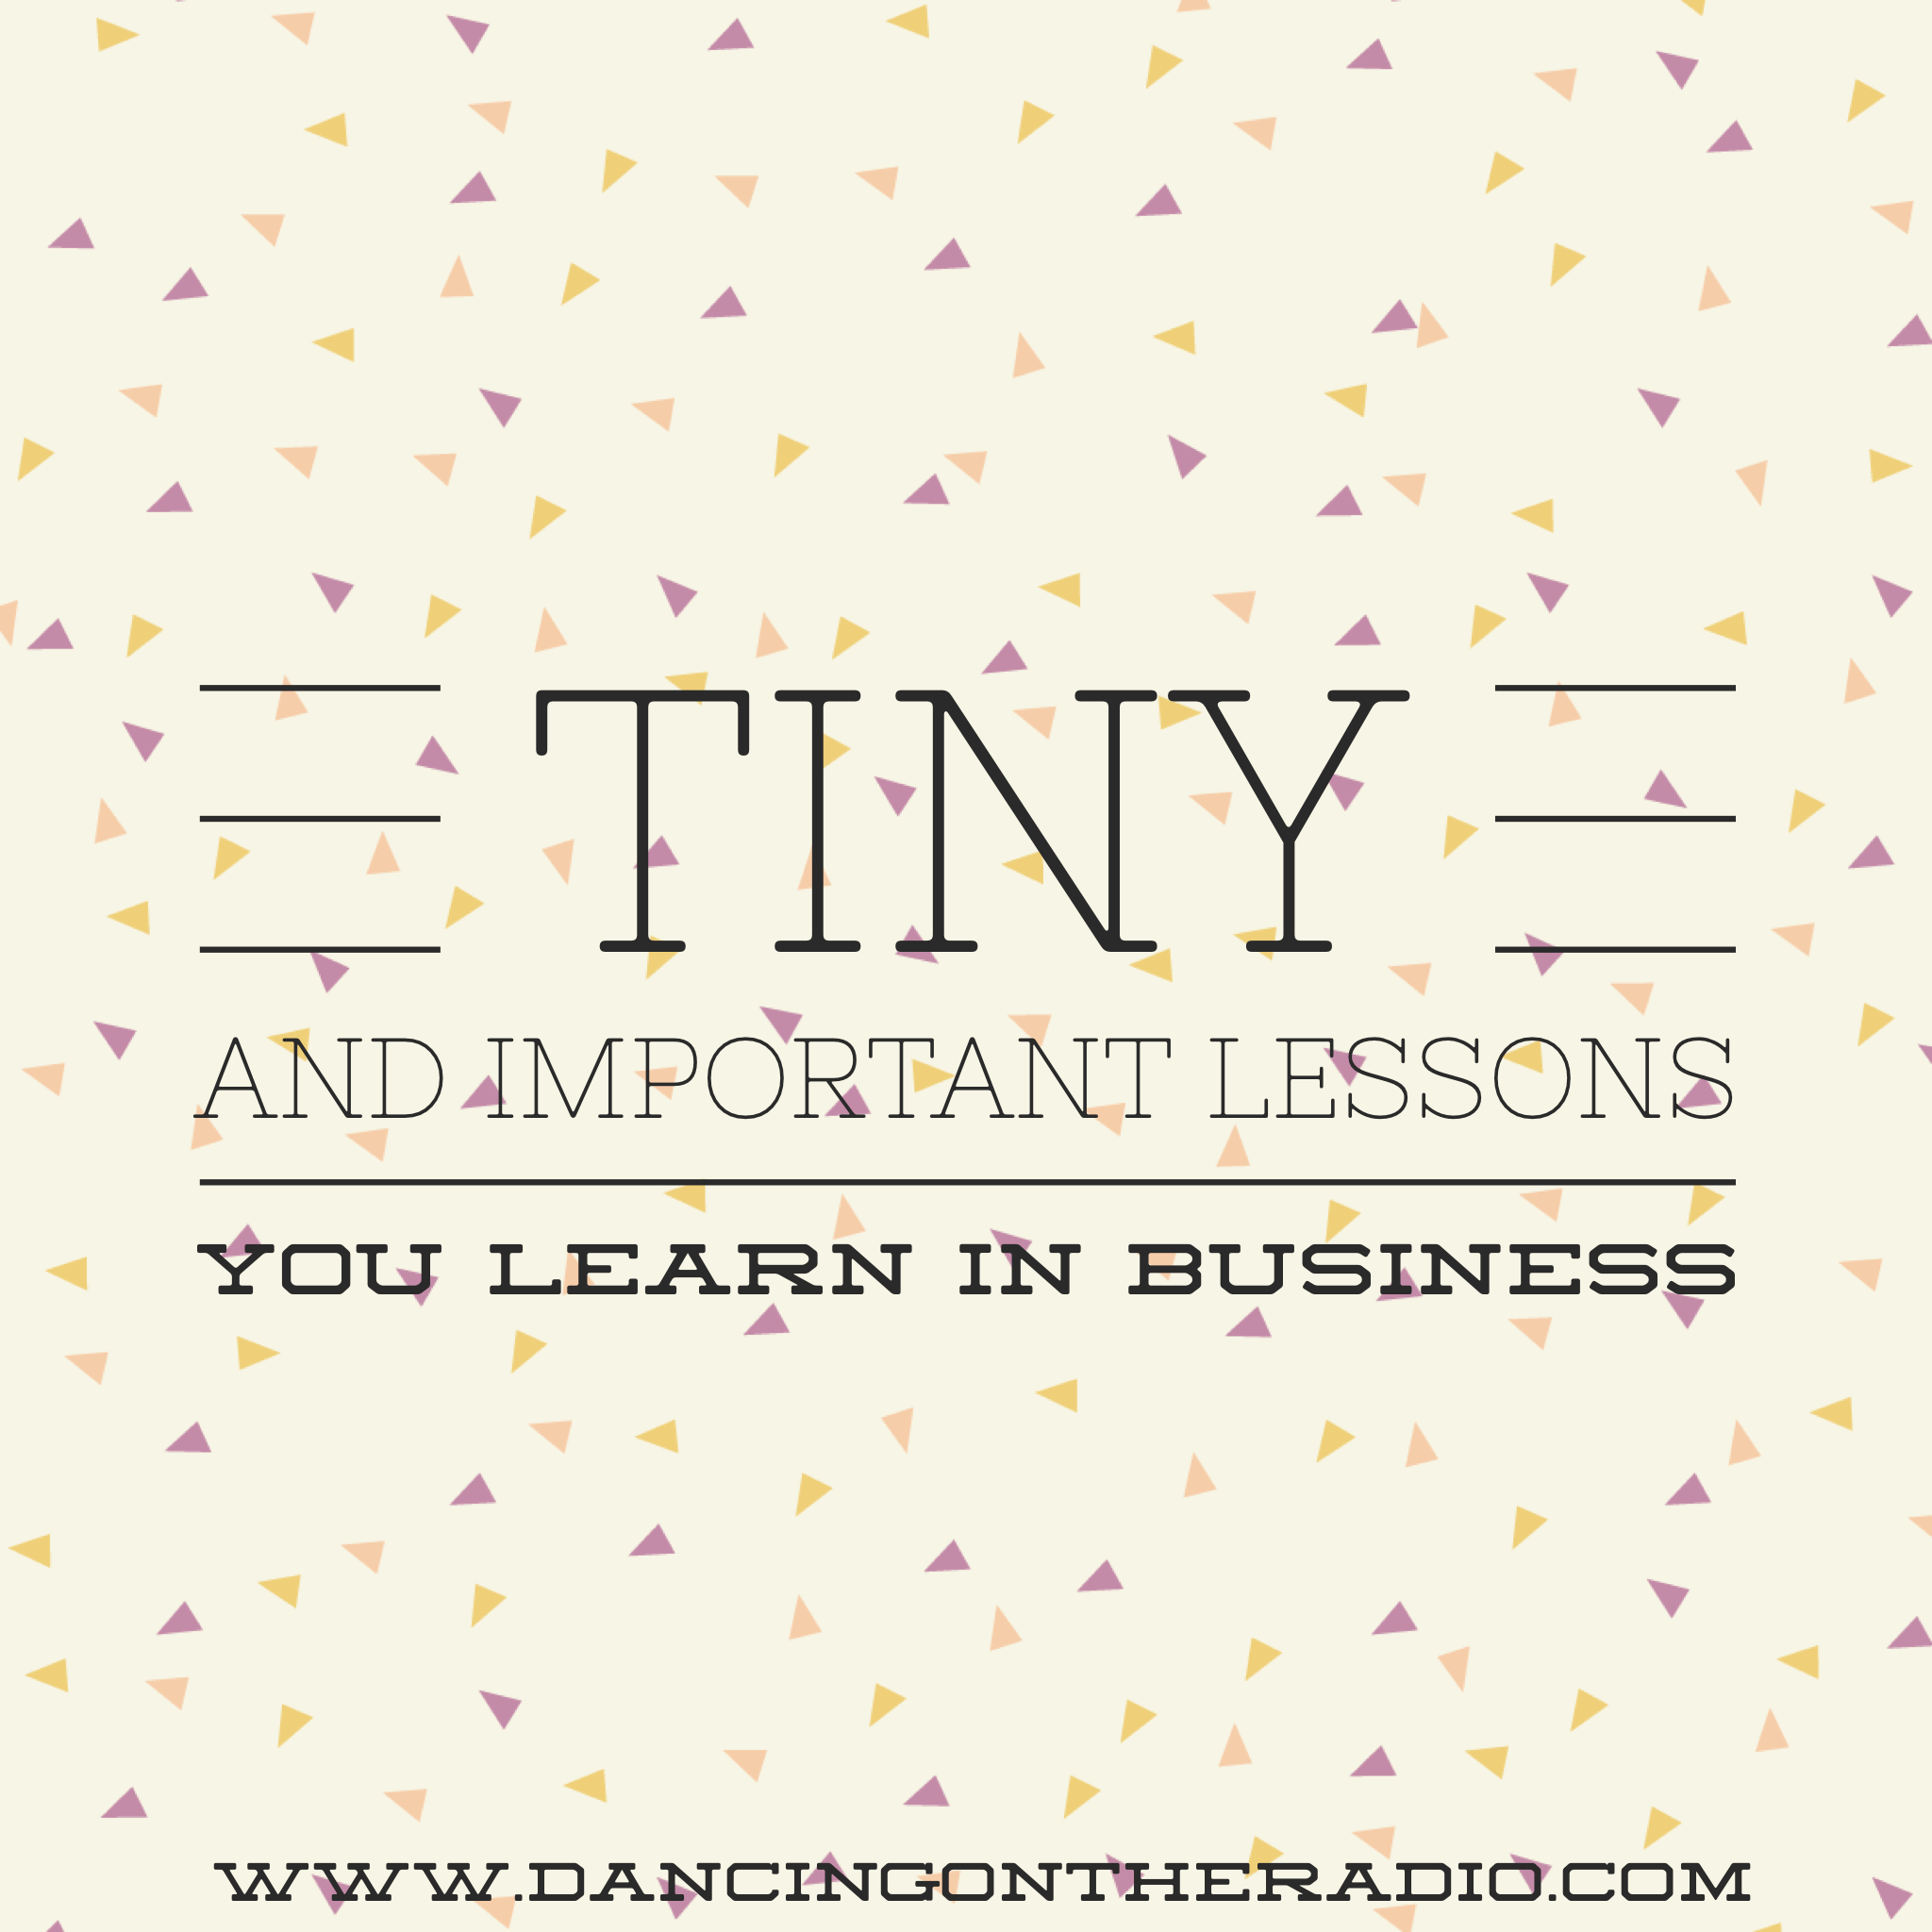 Tiny and important lessons you learn in business